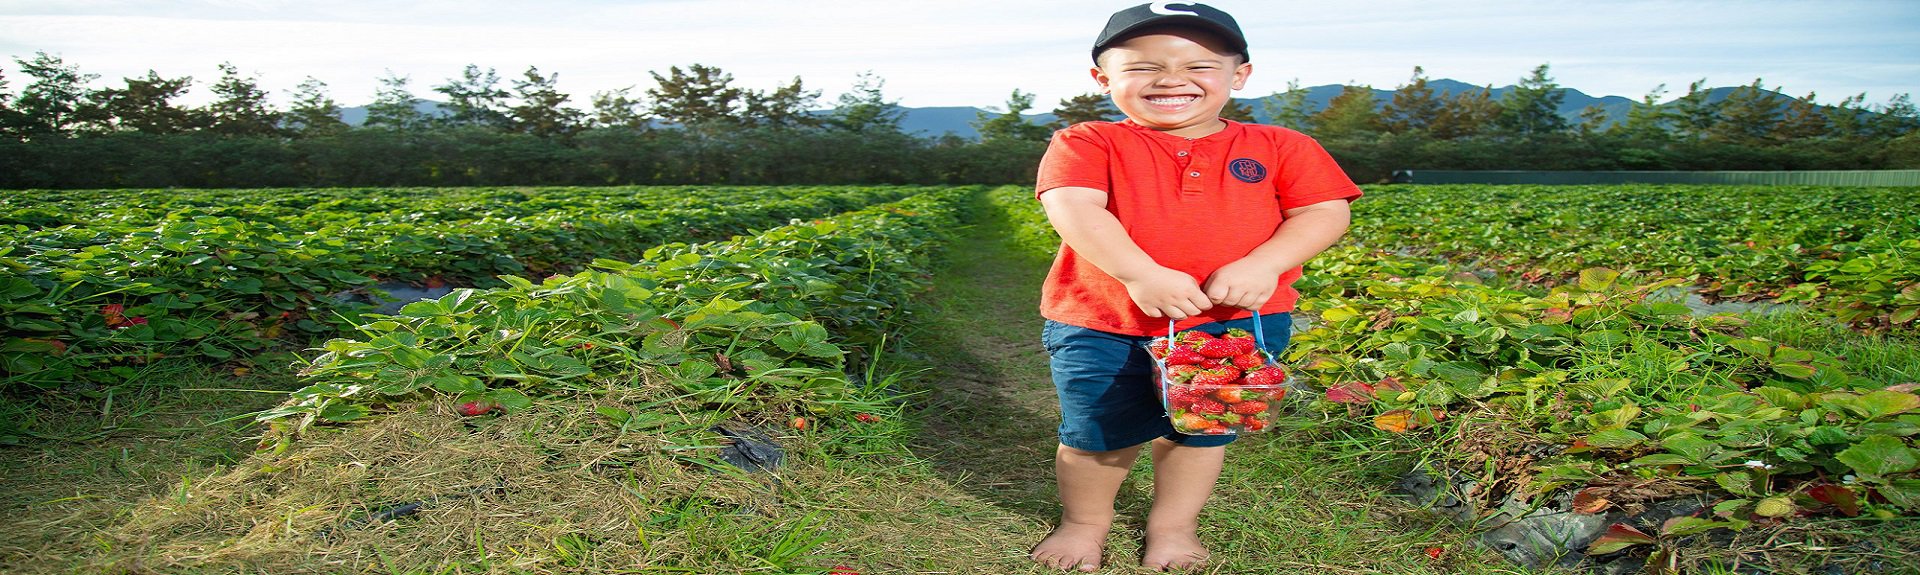 Redberry Farm | Garden Route | Things to do With Kids